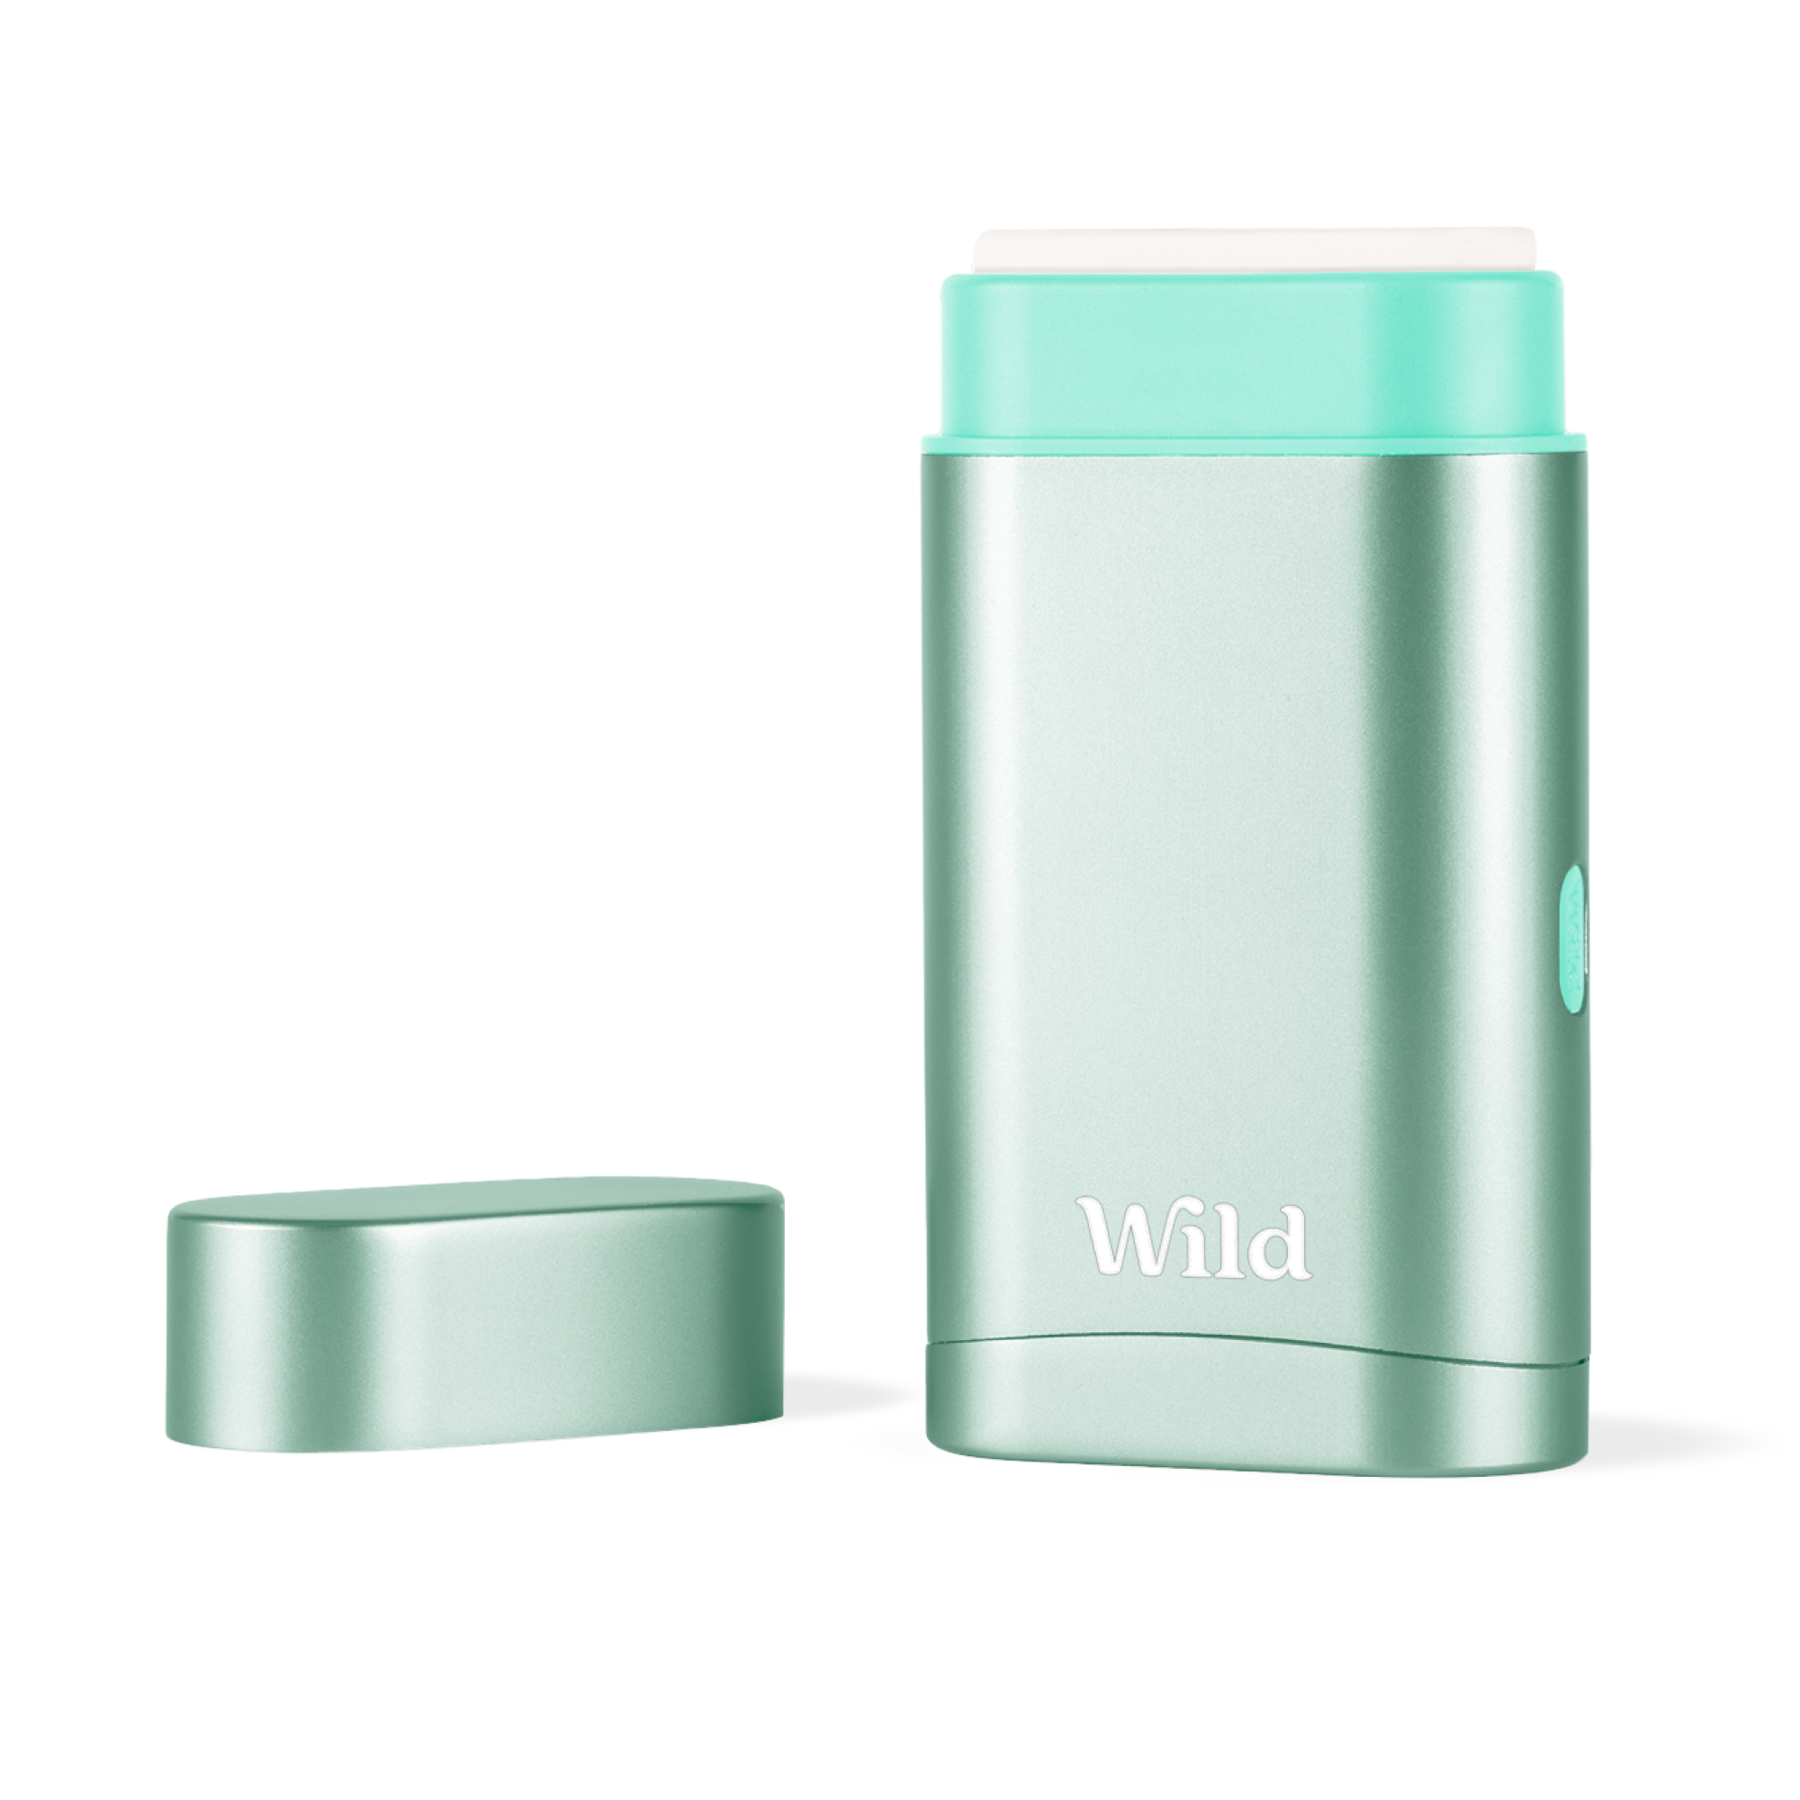 How to fill/refill your Wild refillable deodorant case